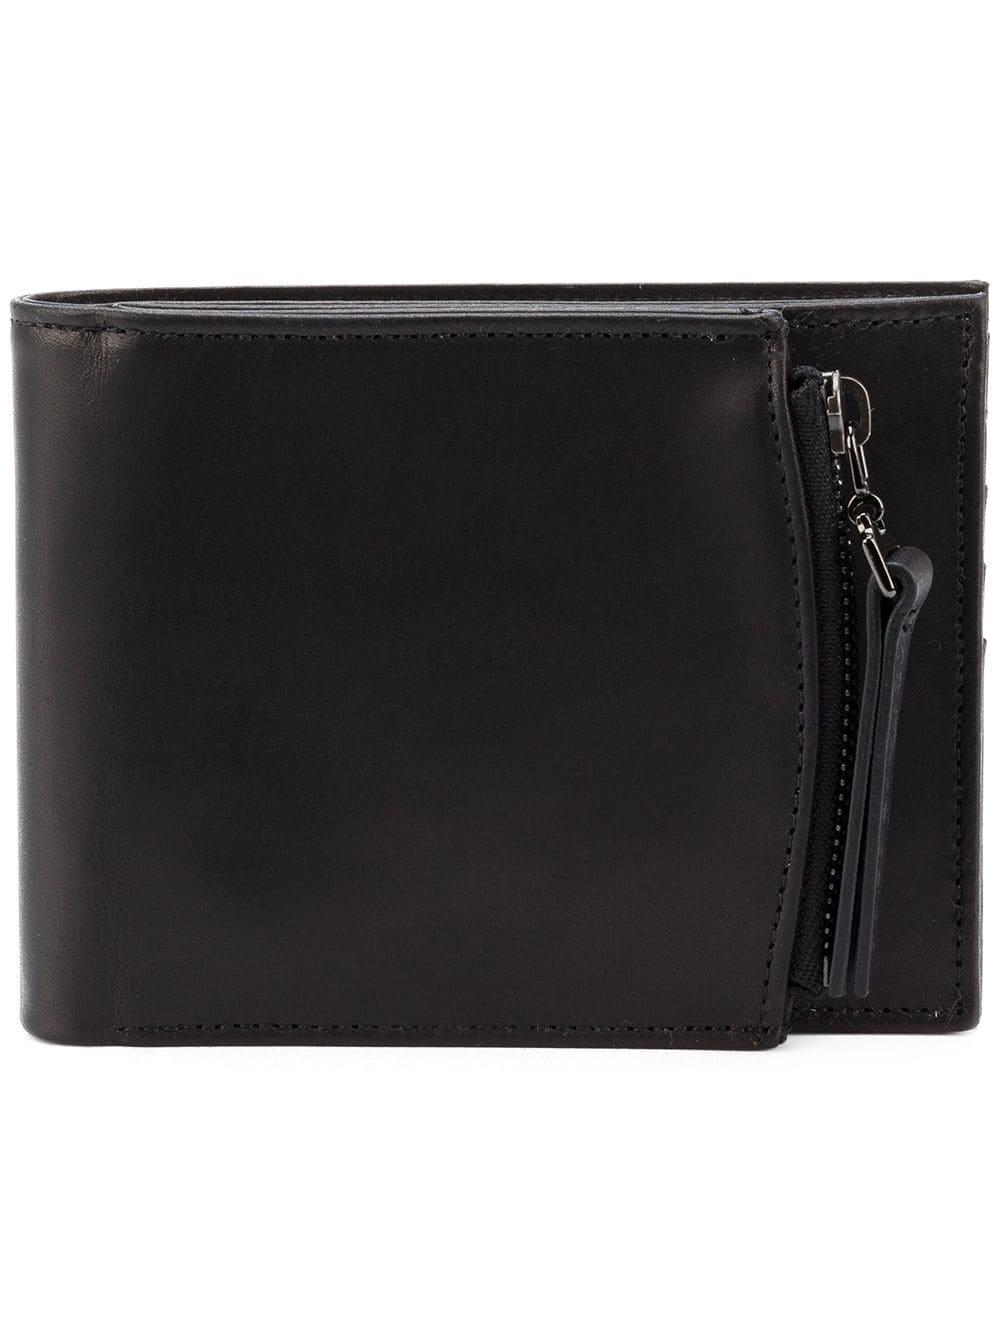 Maison Margiela Leather Zip Compartment Billfold Wallet in Black for